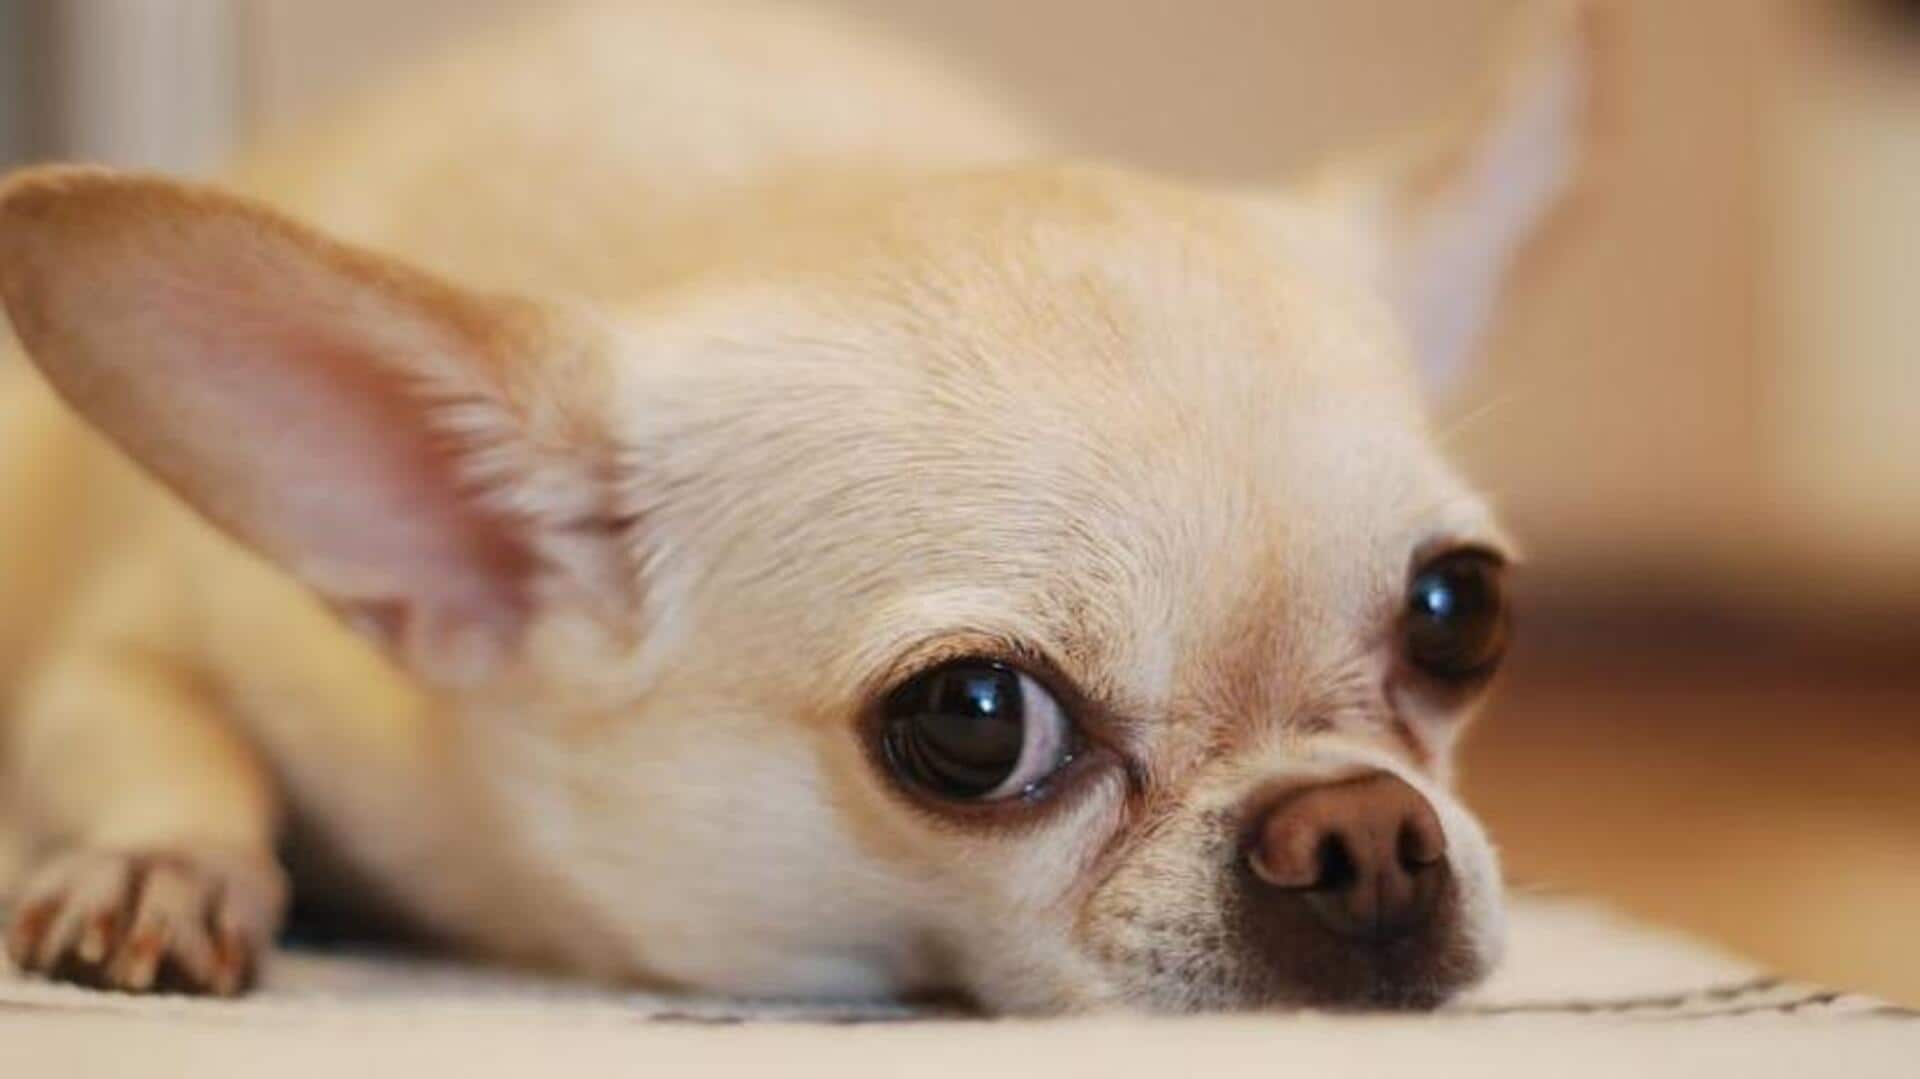 Chihuahua training: How to shape your dog's temperament